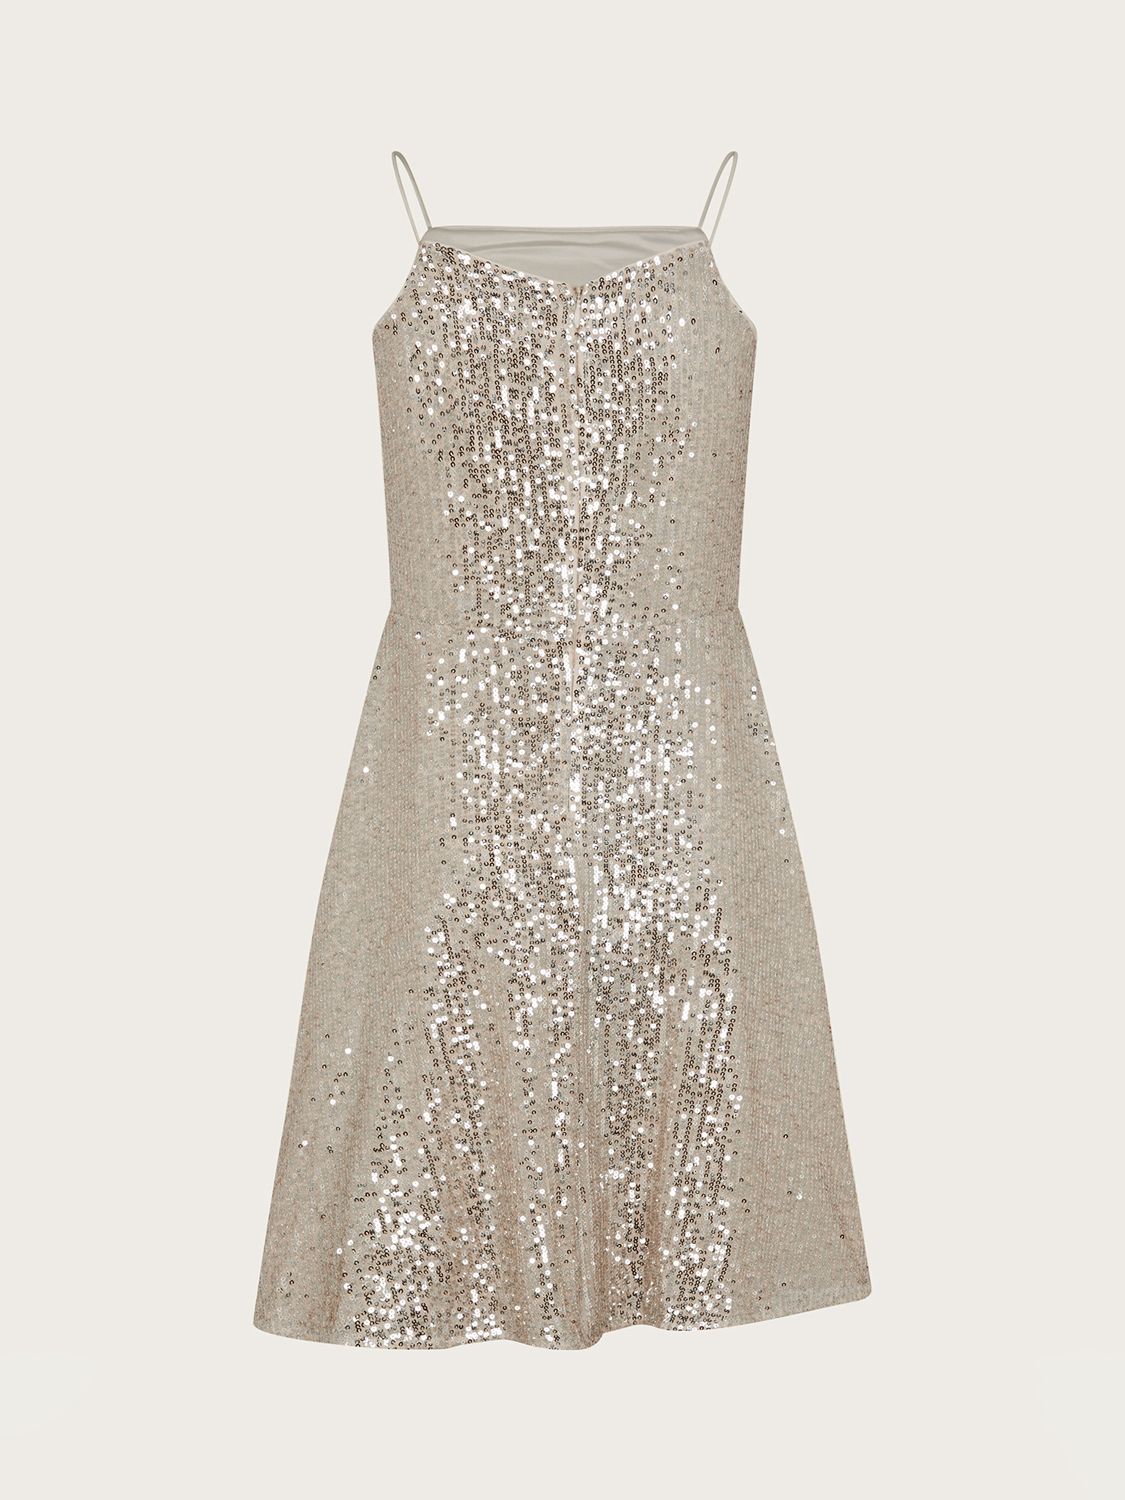 Monsoon Kids' Charlotte Sequin Cut Out Party Dress, Champagne, 14 years